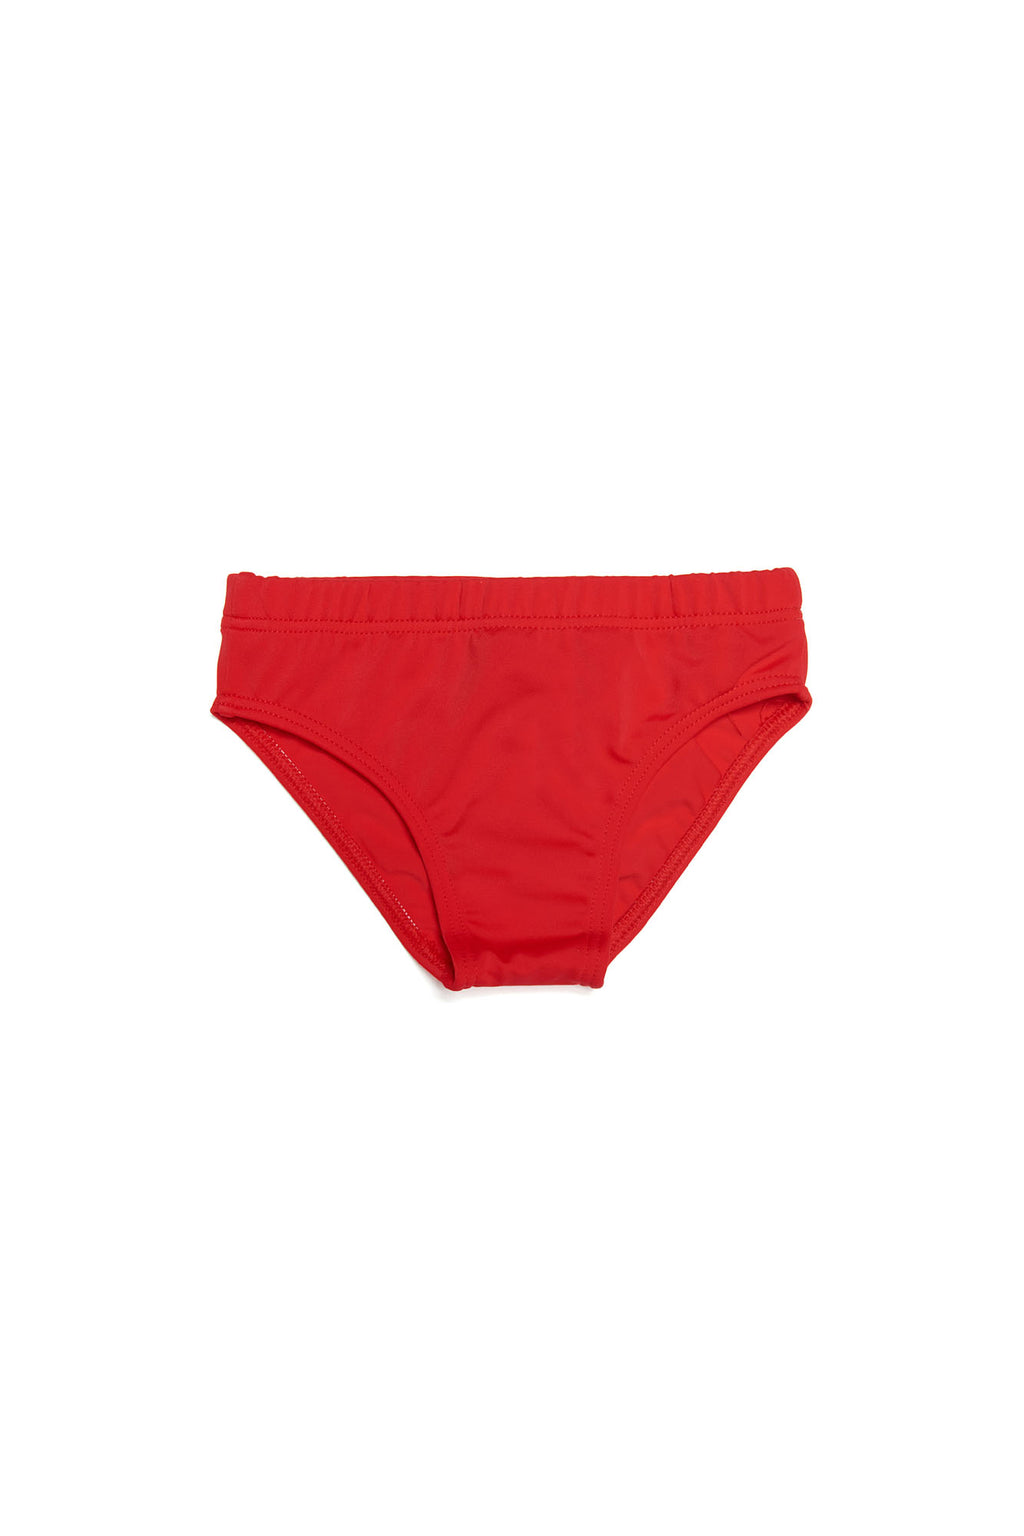 Red lycra brief costume with logo